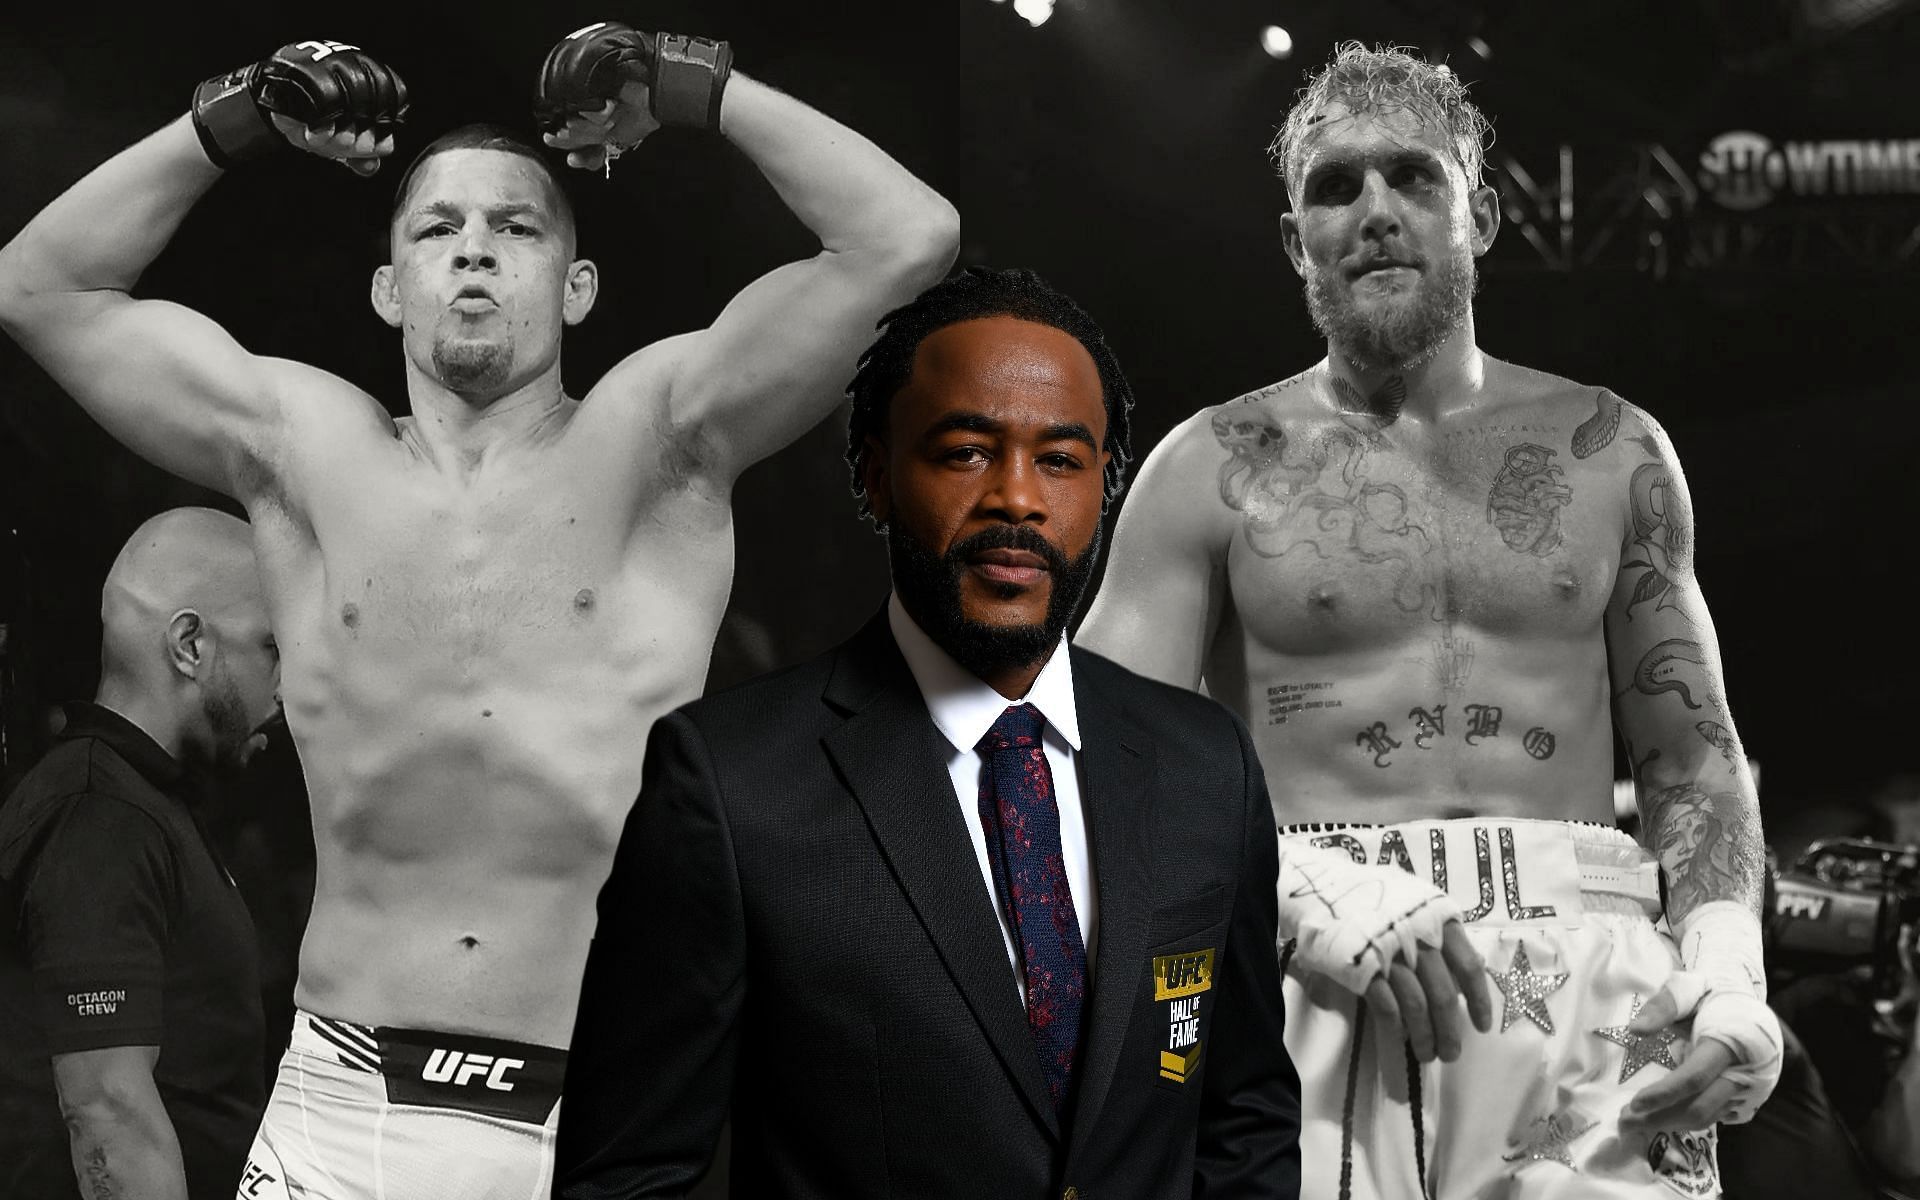 Nate Diaz (left), Rashad Evans (center), and Jake Paul (right) (Images via Getty and Instagram/Rashad Evans)